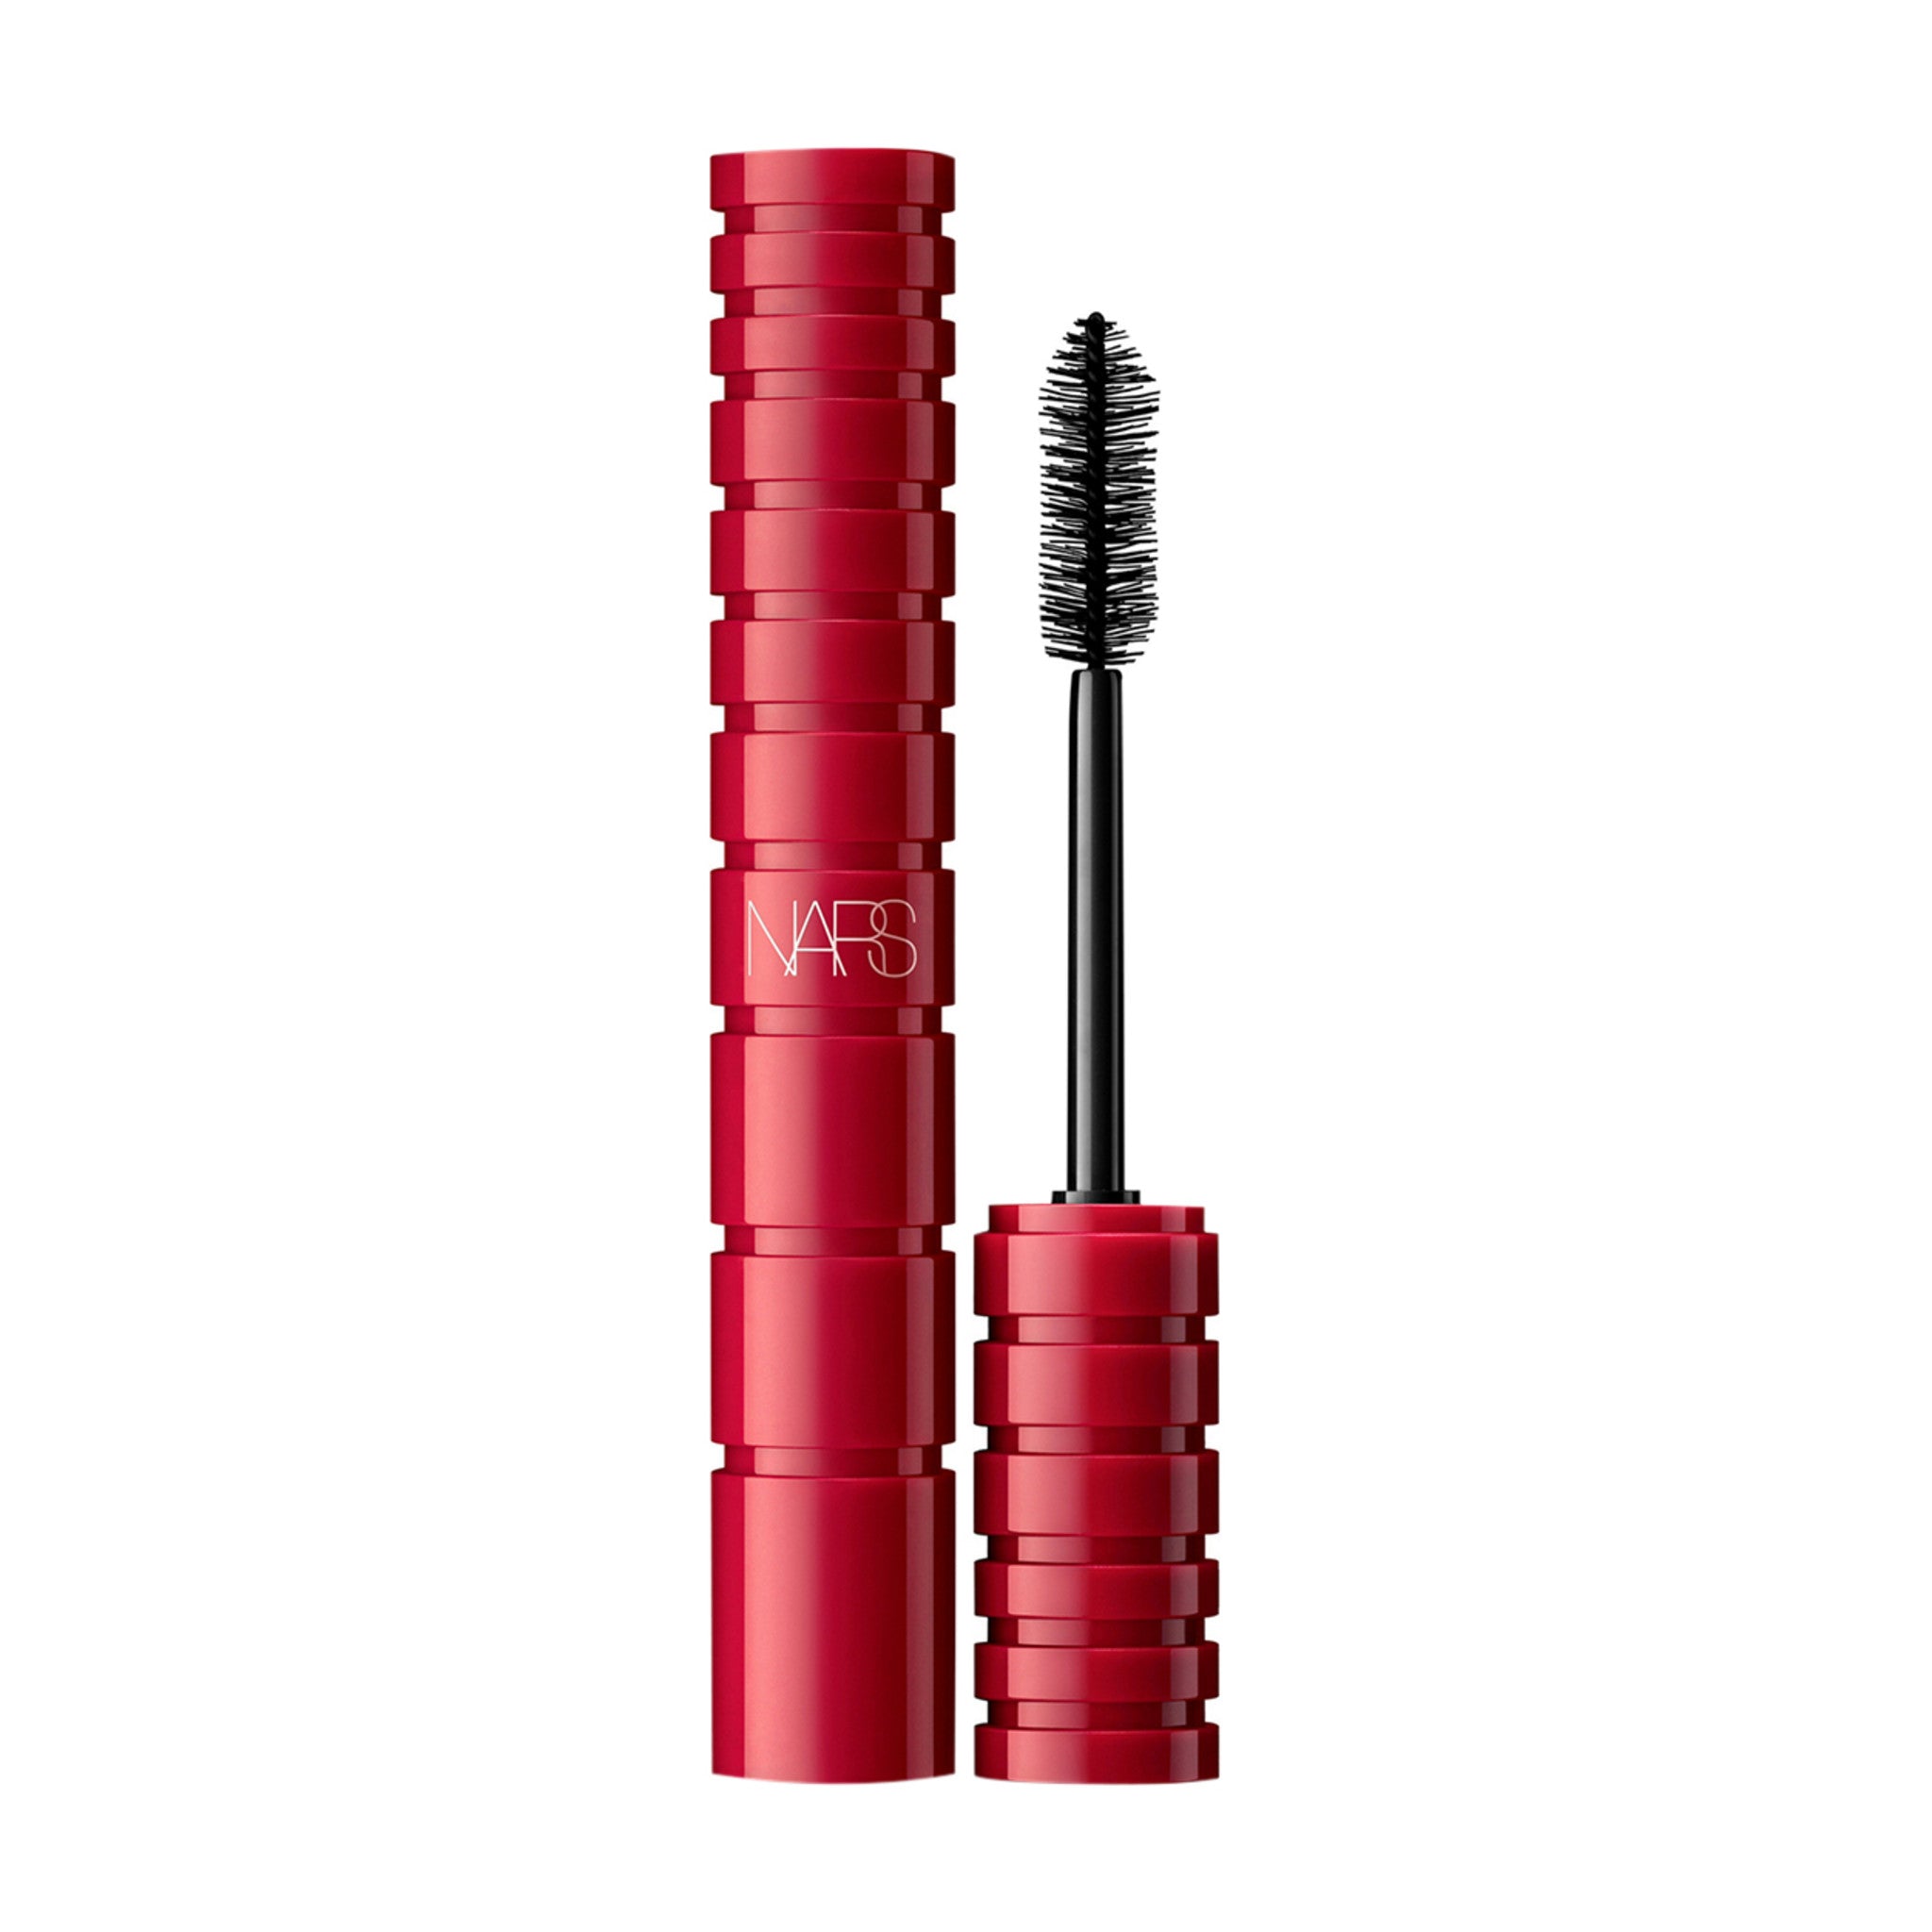 Nars Climax Mascara main image. This product is in the color black